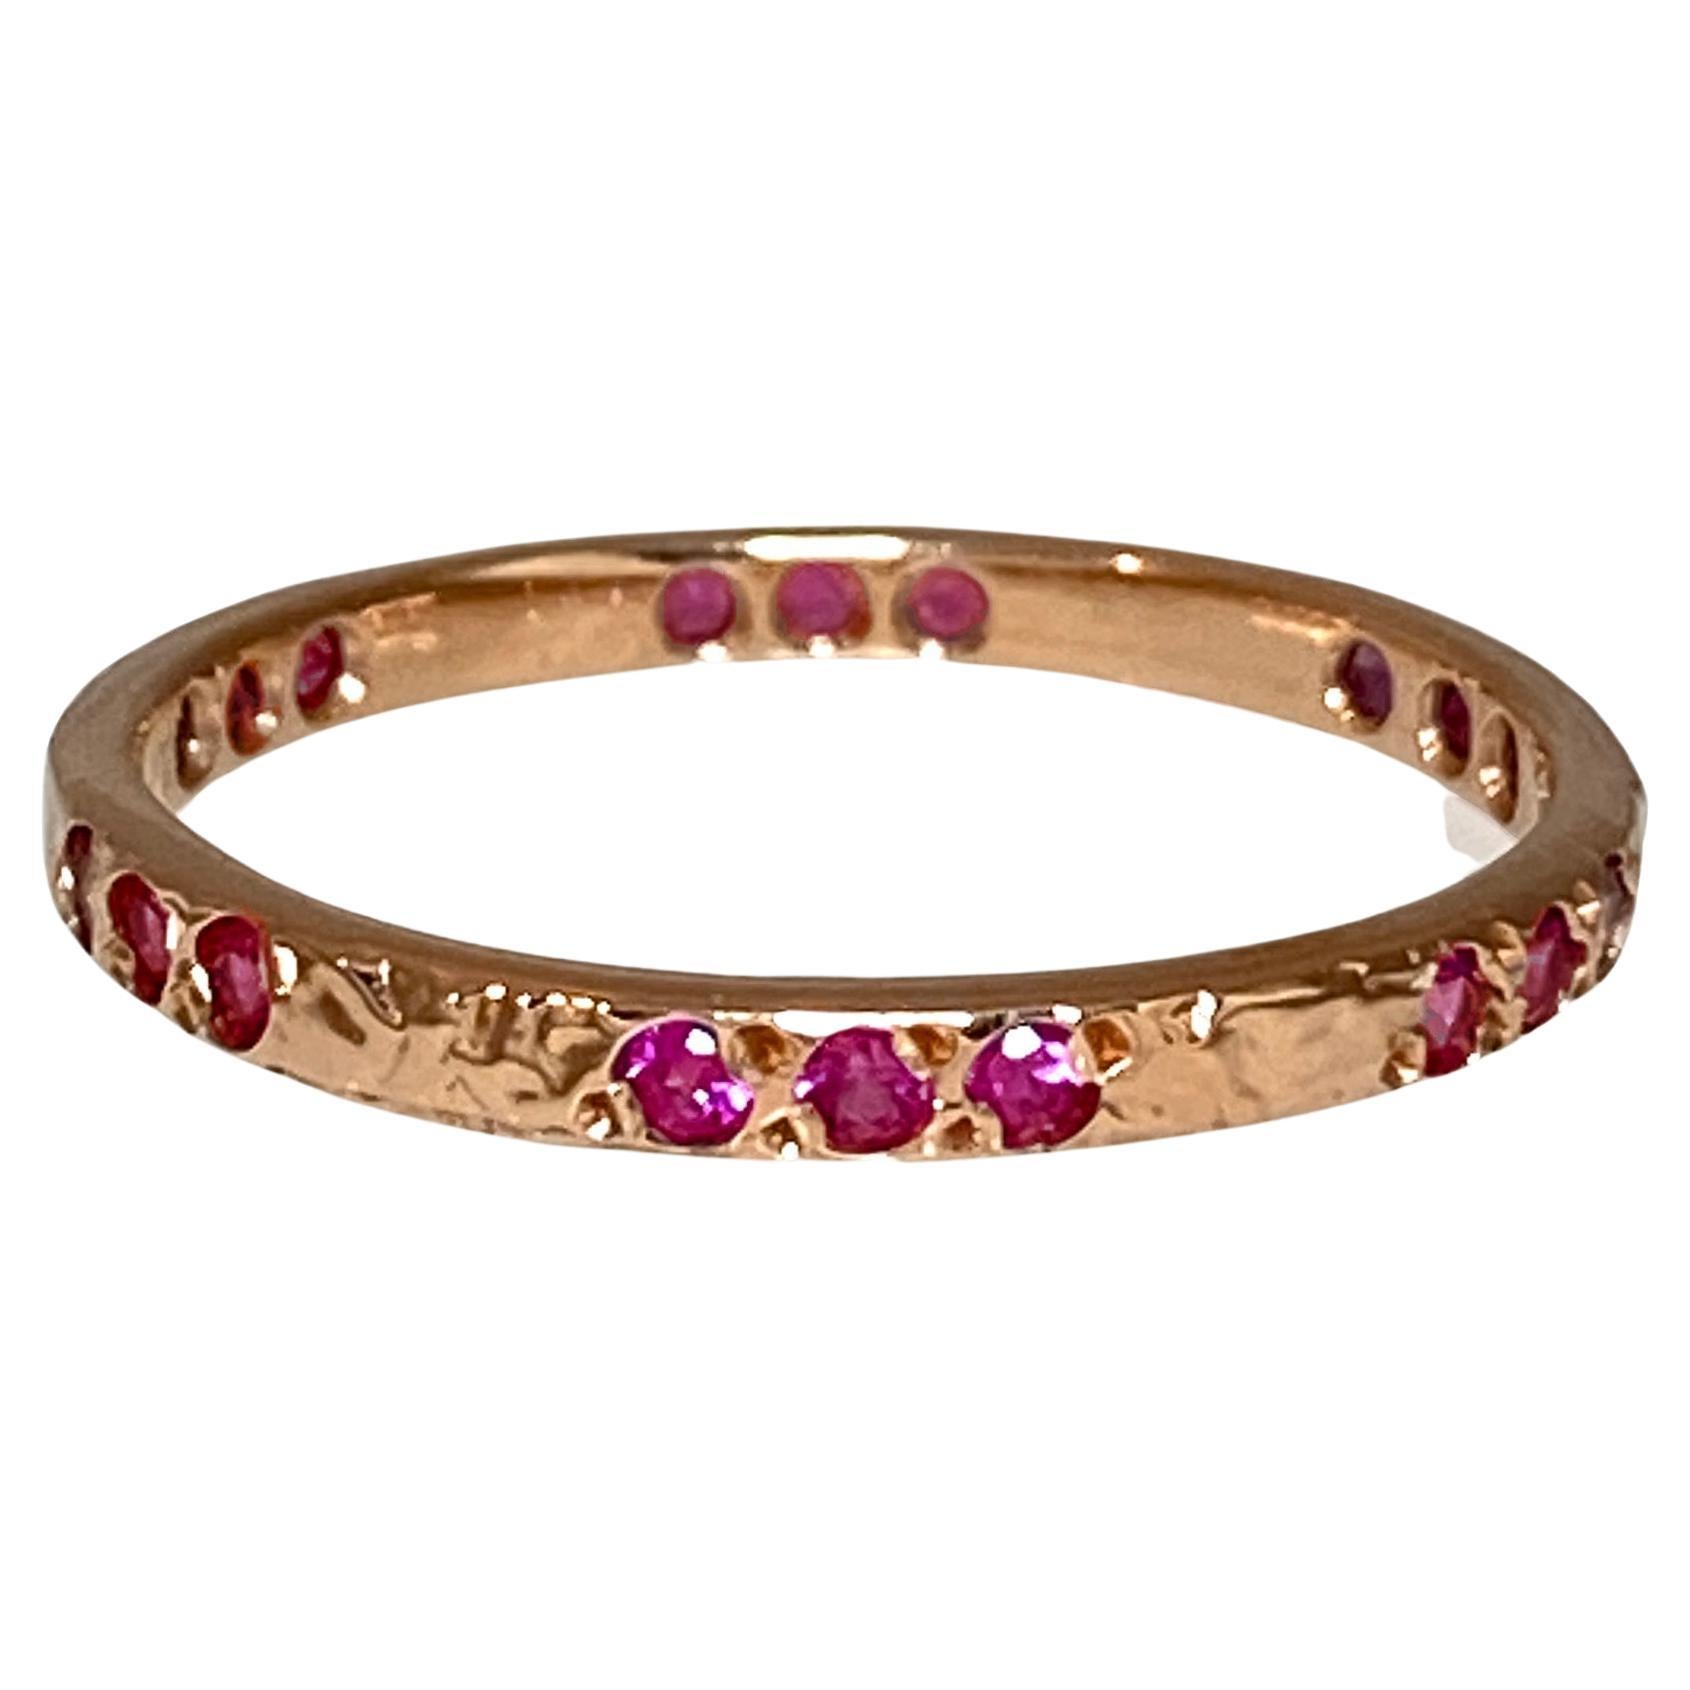 For Sale:  Pink Sapphire in 14 Karat Textured Rose Gold band from K.MITA - Small